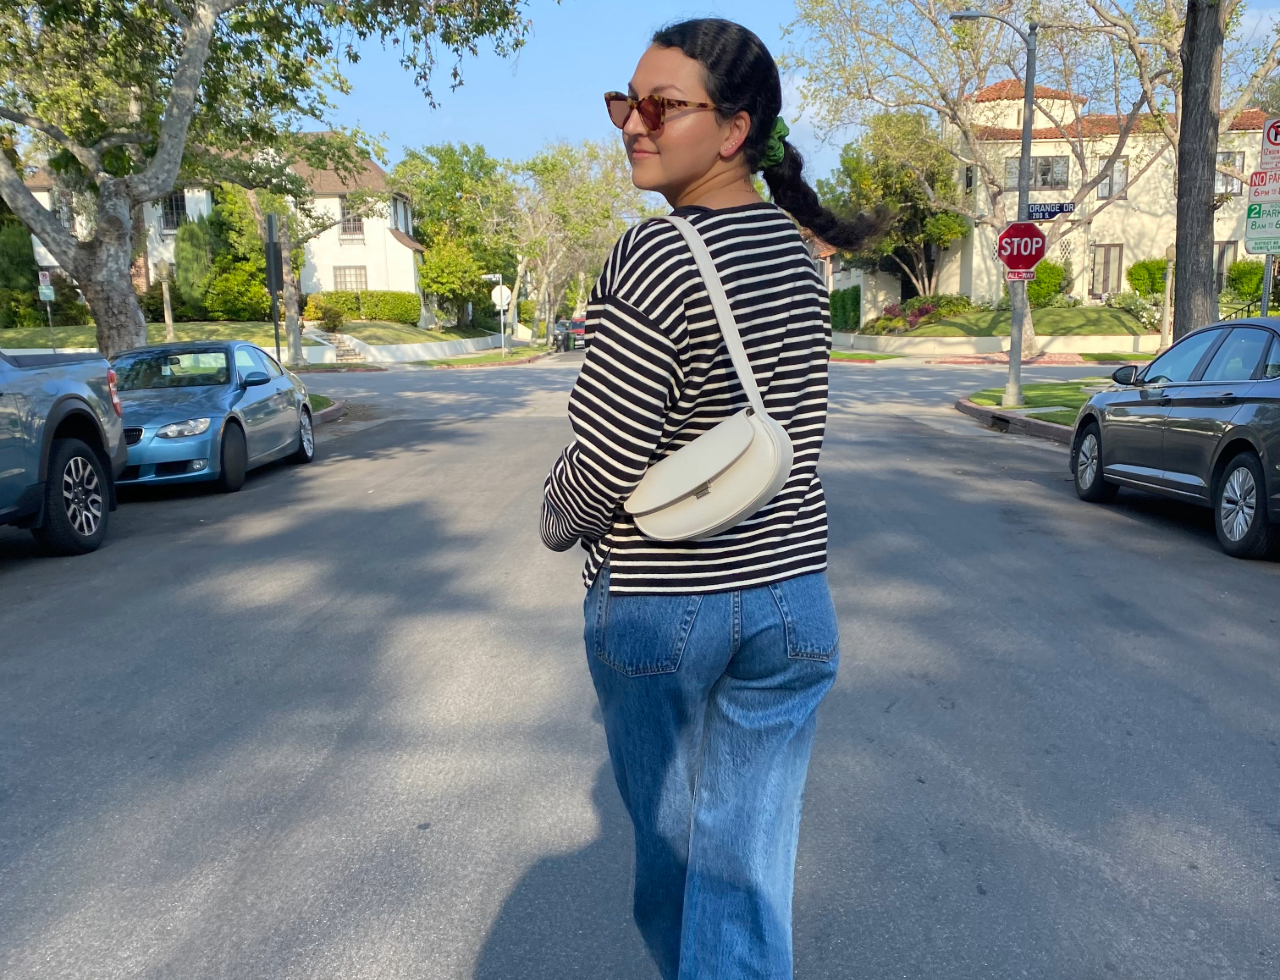 Woman in a striped T-shirt, jeans, with a cream crossbody bag.